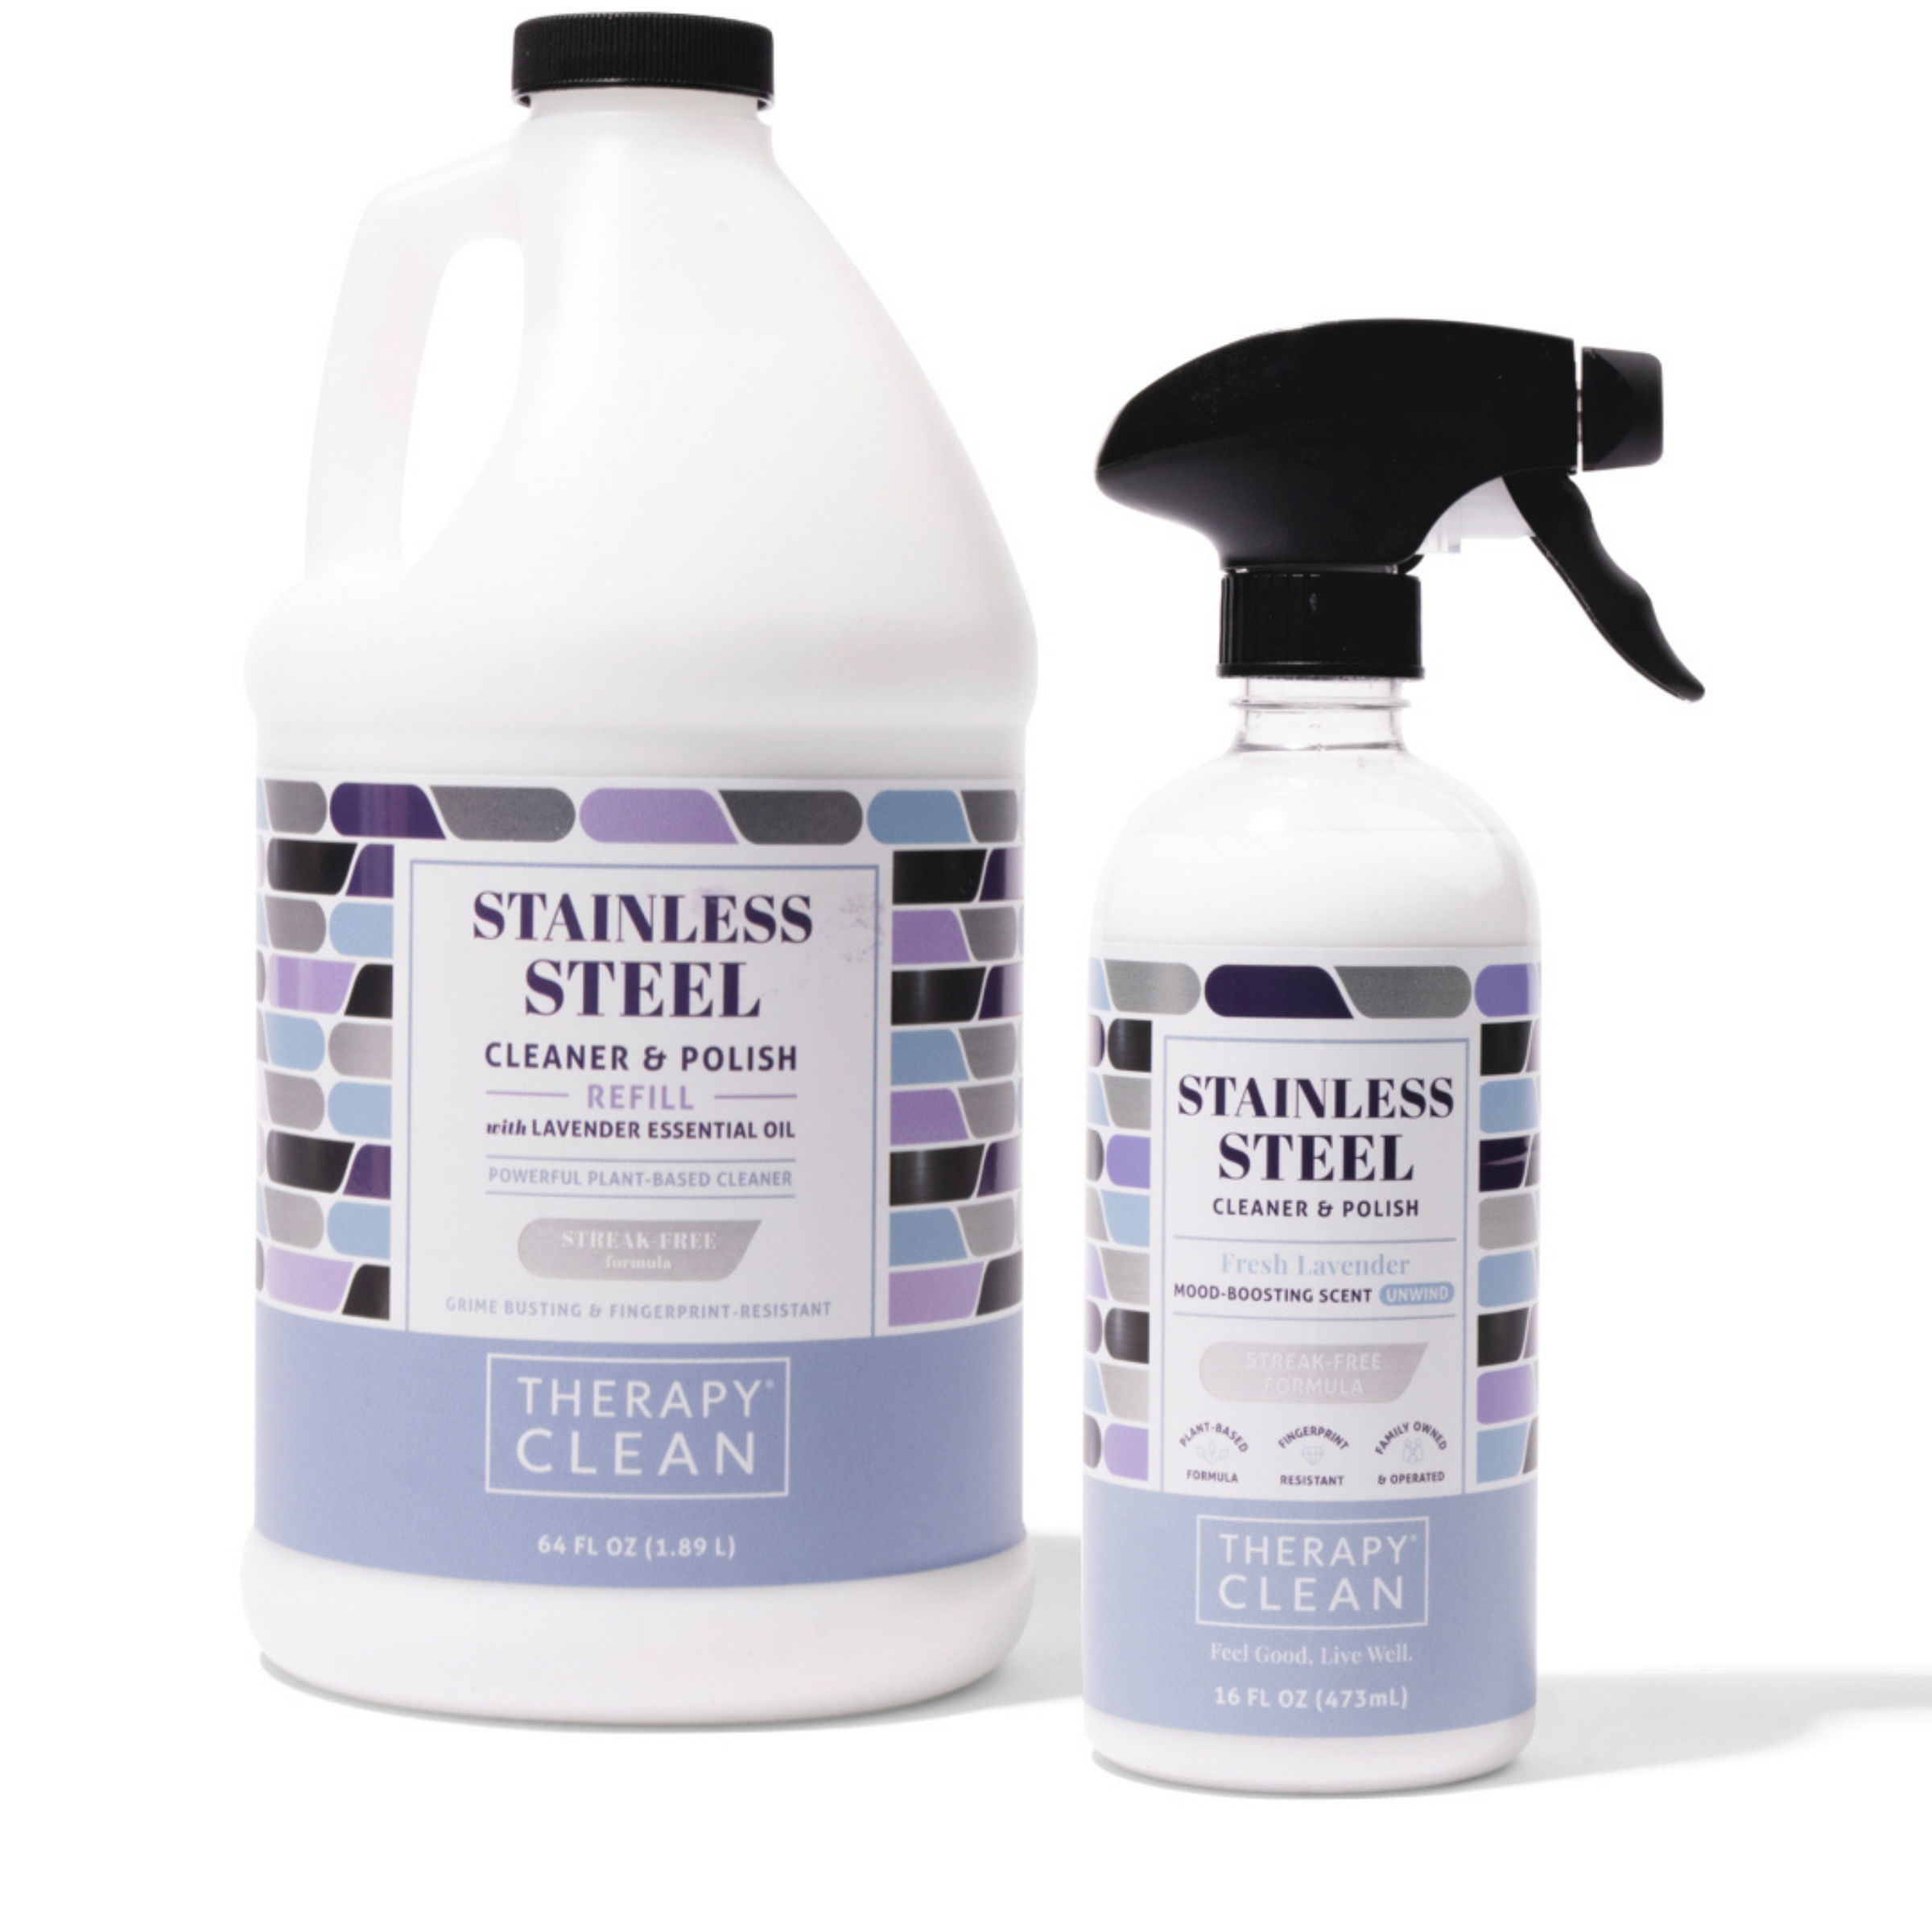 SSI2EA - $16.22 - Stainless Steel Cleaner Polish 1qt Can